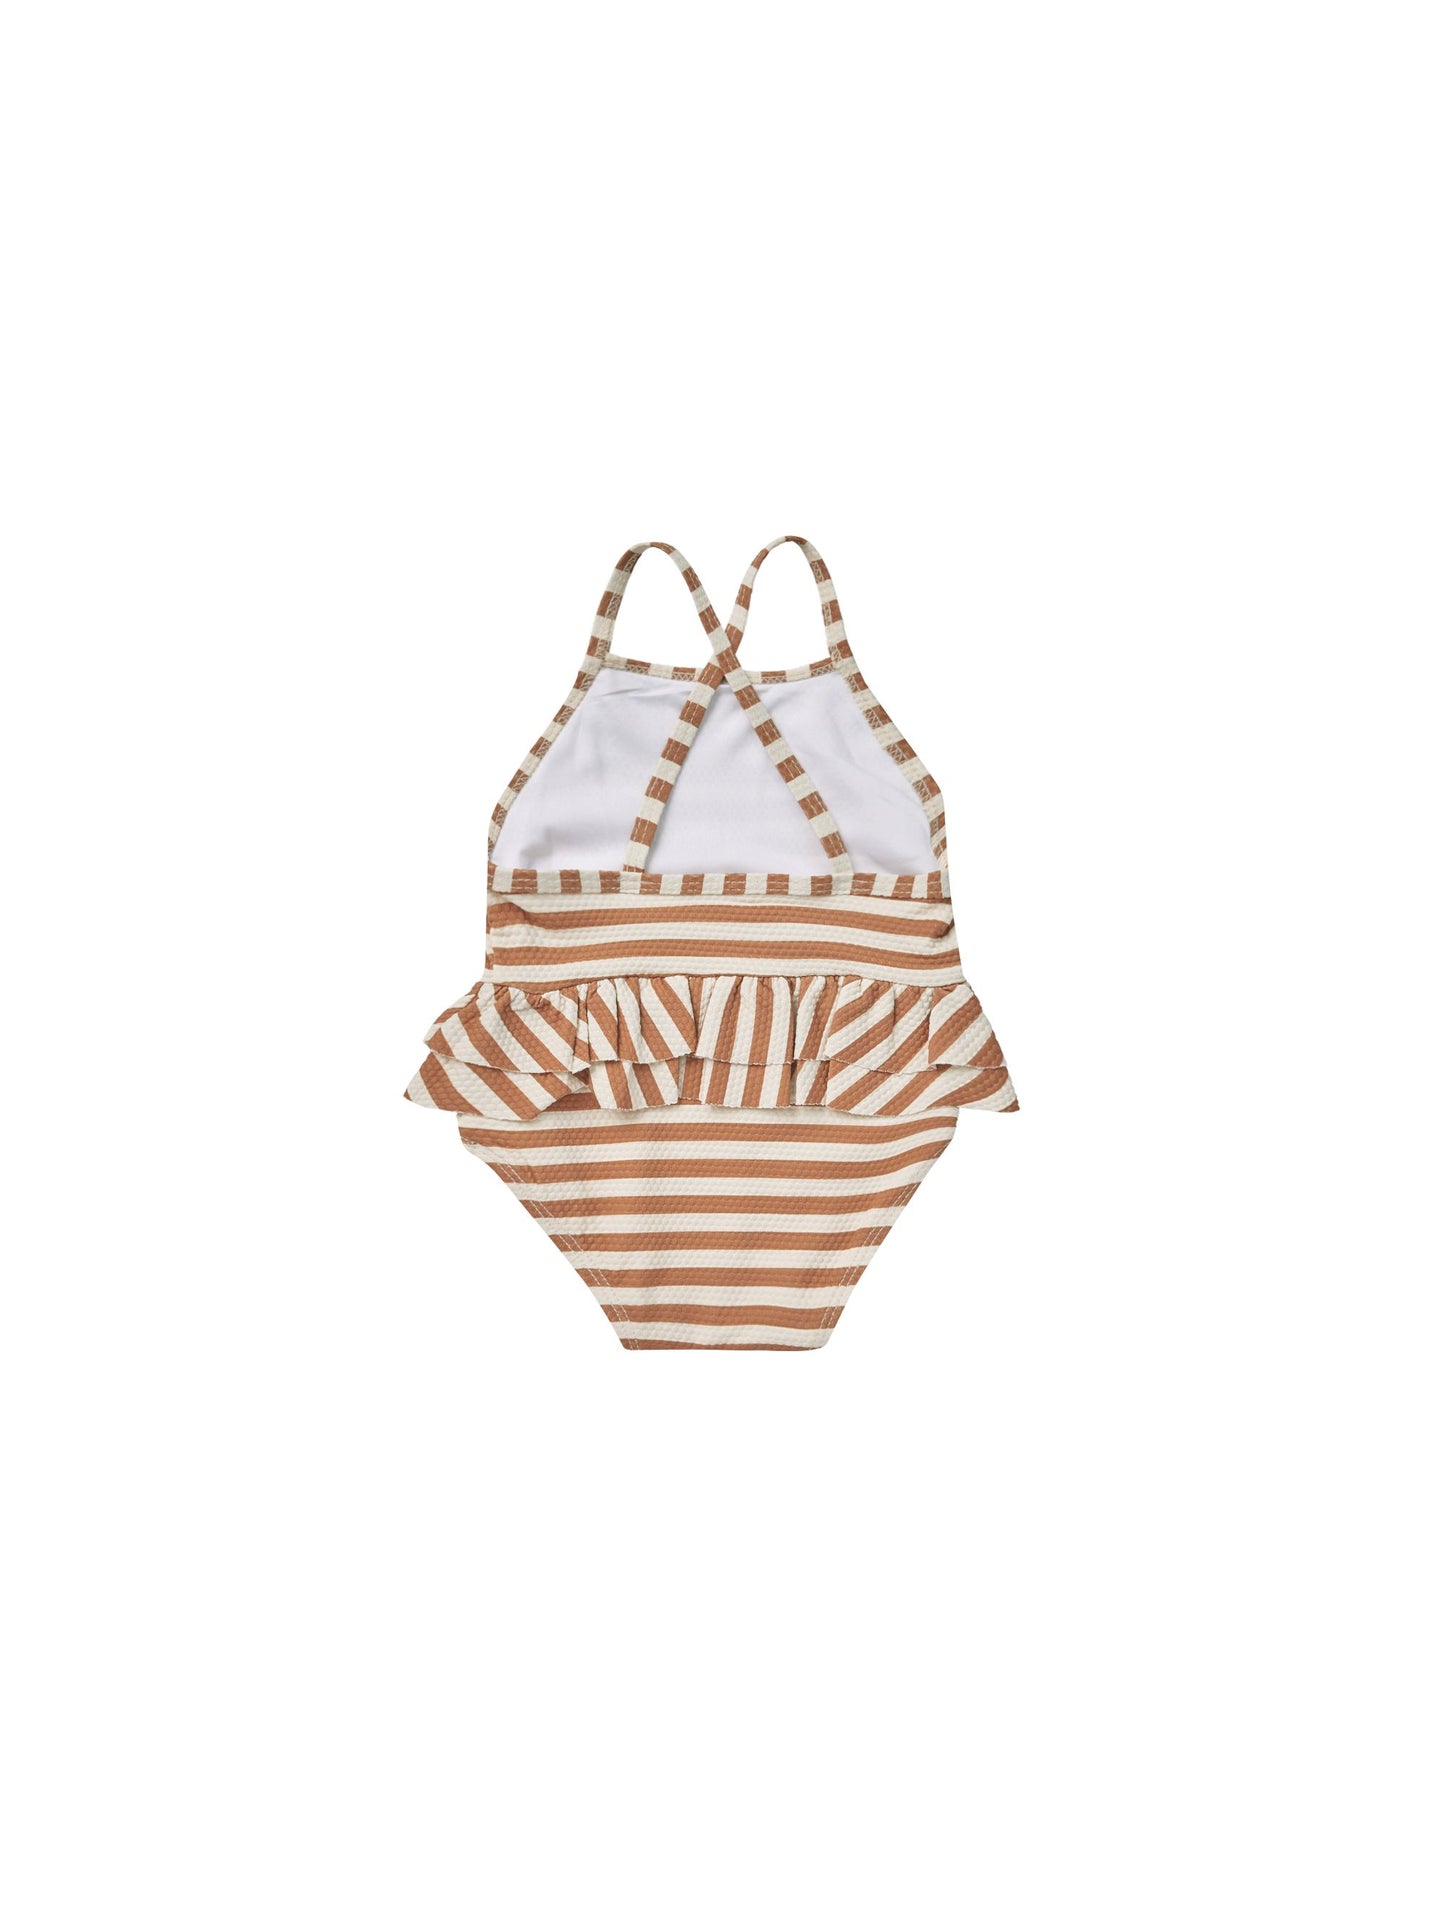 Quincy Mae Ruffled One-Piece Swimsuit in Clay Stripe